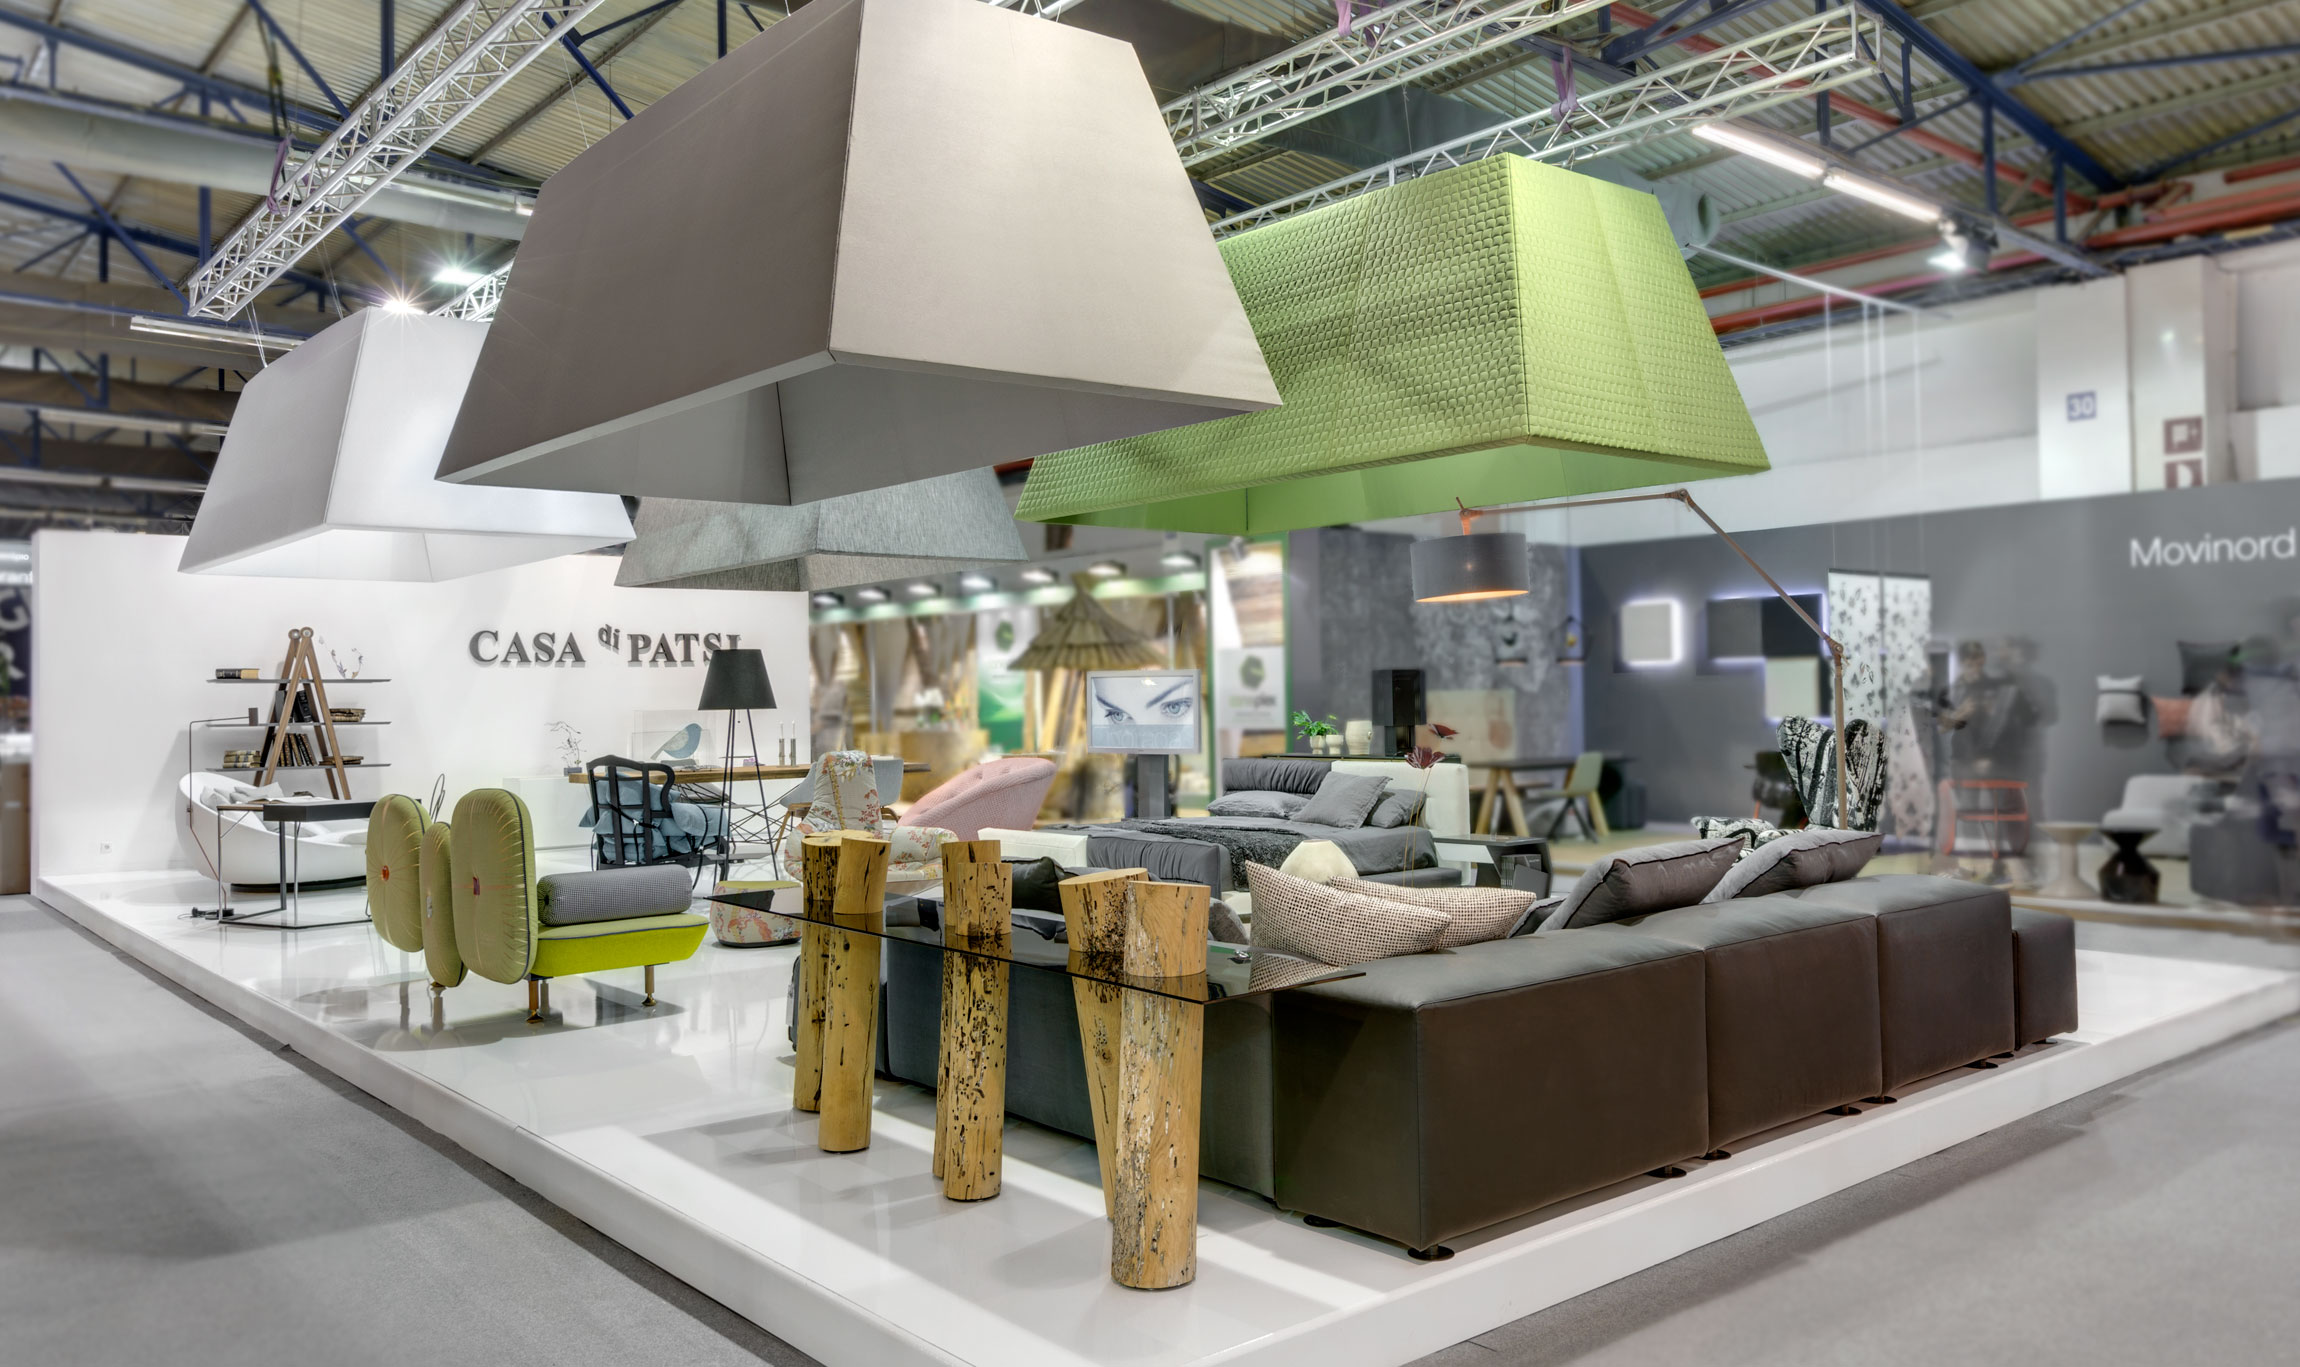 pavilion design for the casadipatsi company at 100hotelshow2016-5